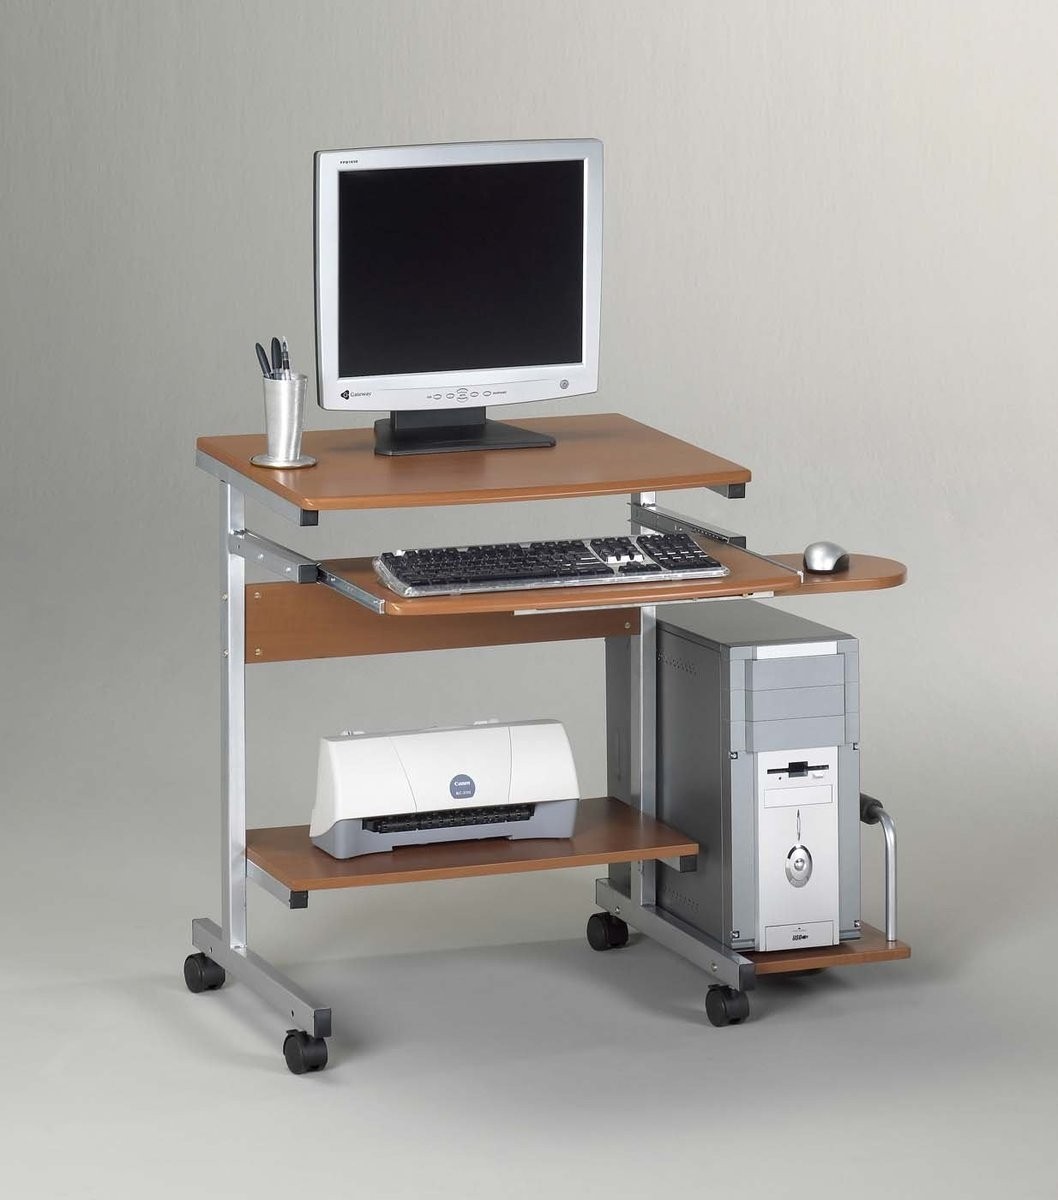 Mayline eastwinds computer desk easily move this compact and transportable